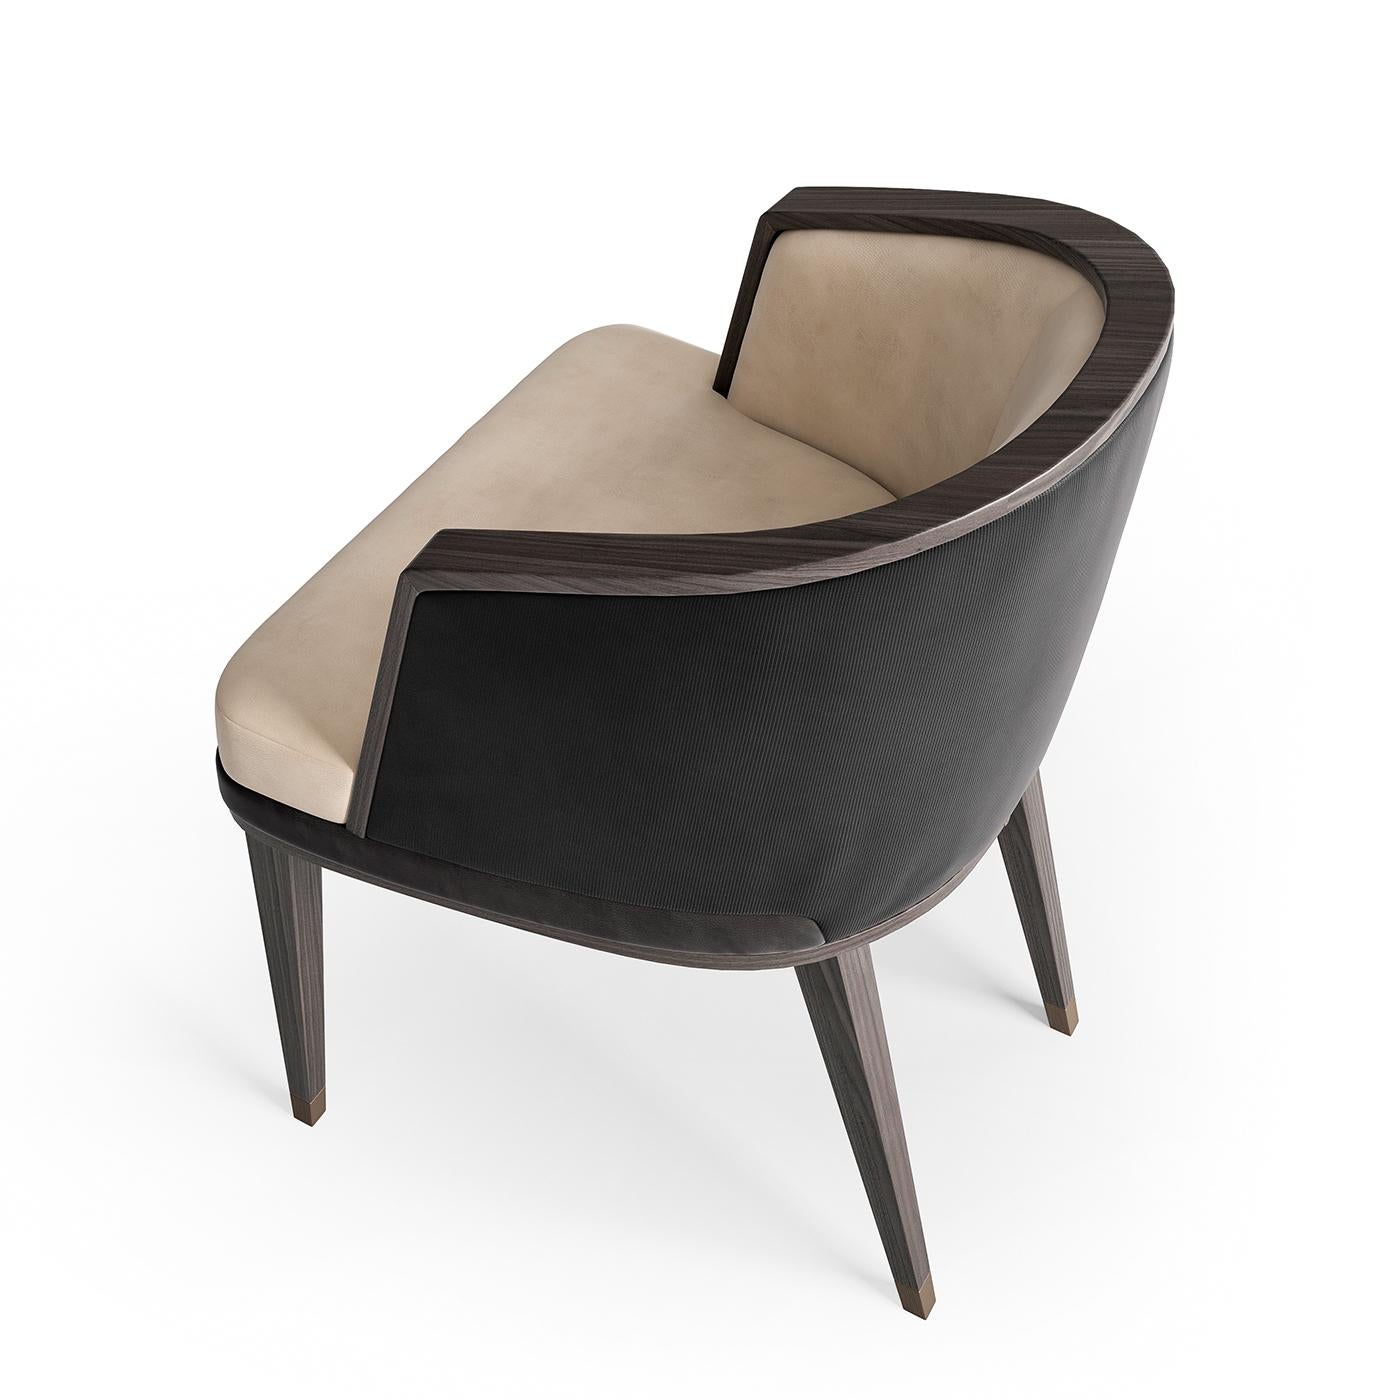 Envelop yourself in timeless chic style with the wrap around armchair. Featuring handsome veneer profiles, the chair back wraps around the base to become a cozy armrest, while the back and front can be upholstered in nabuck leather of different